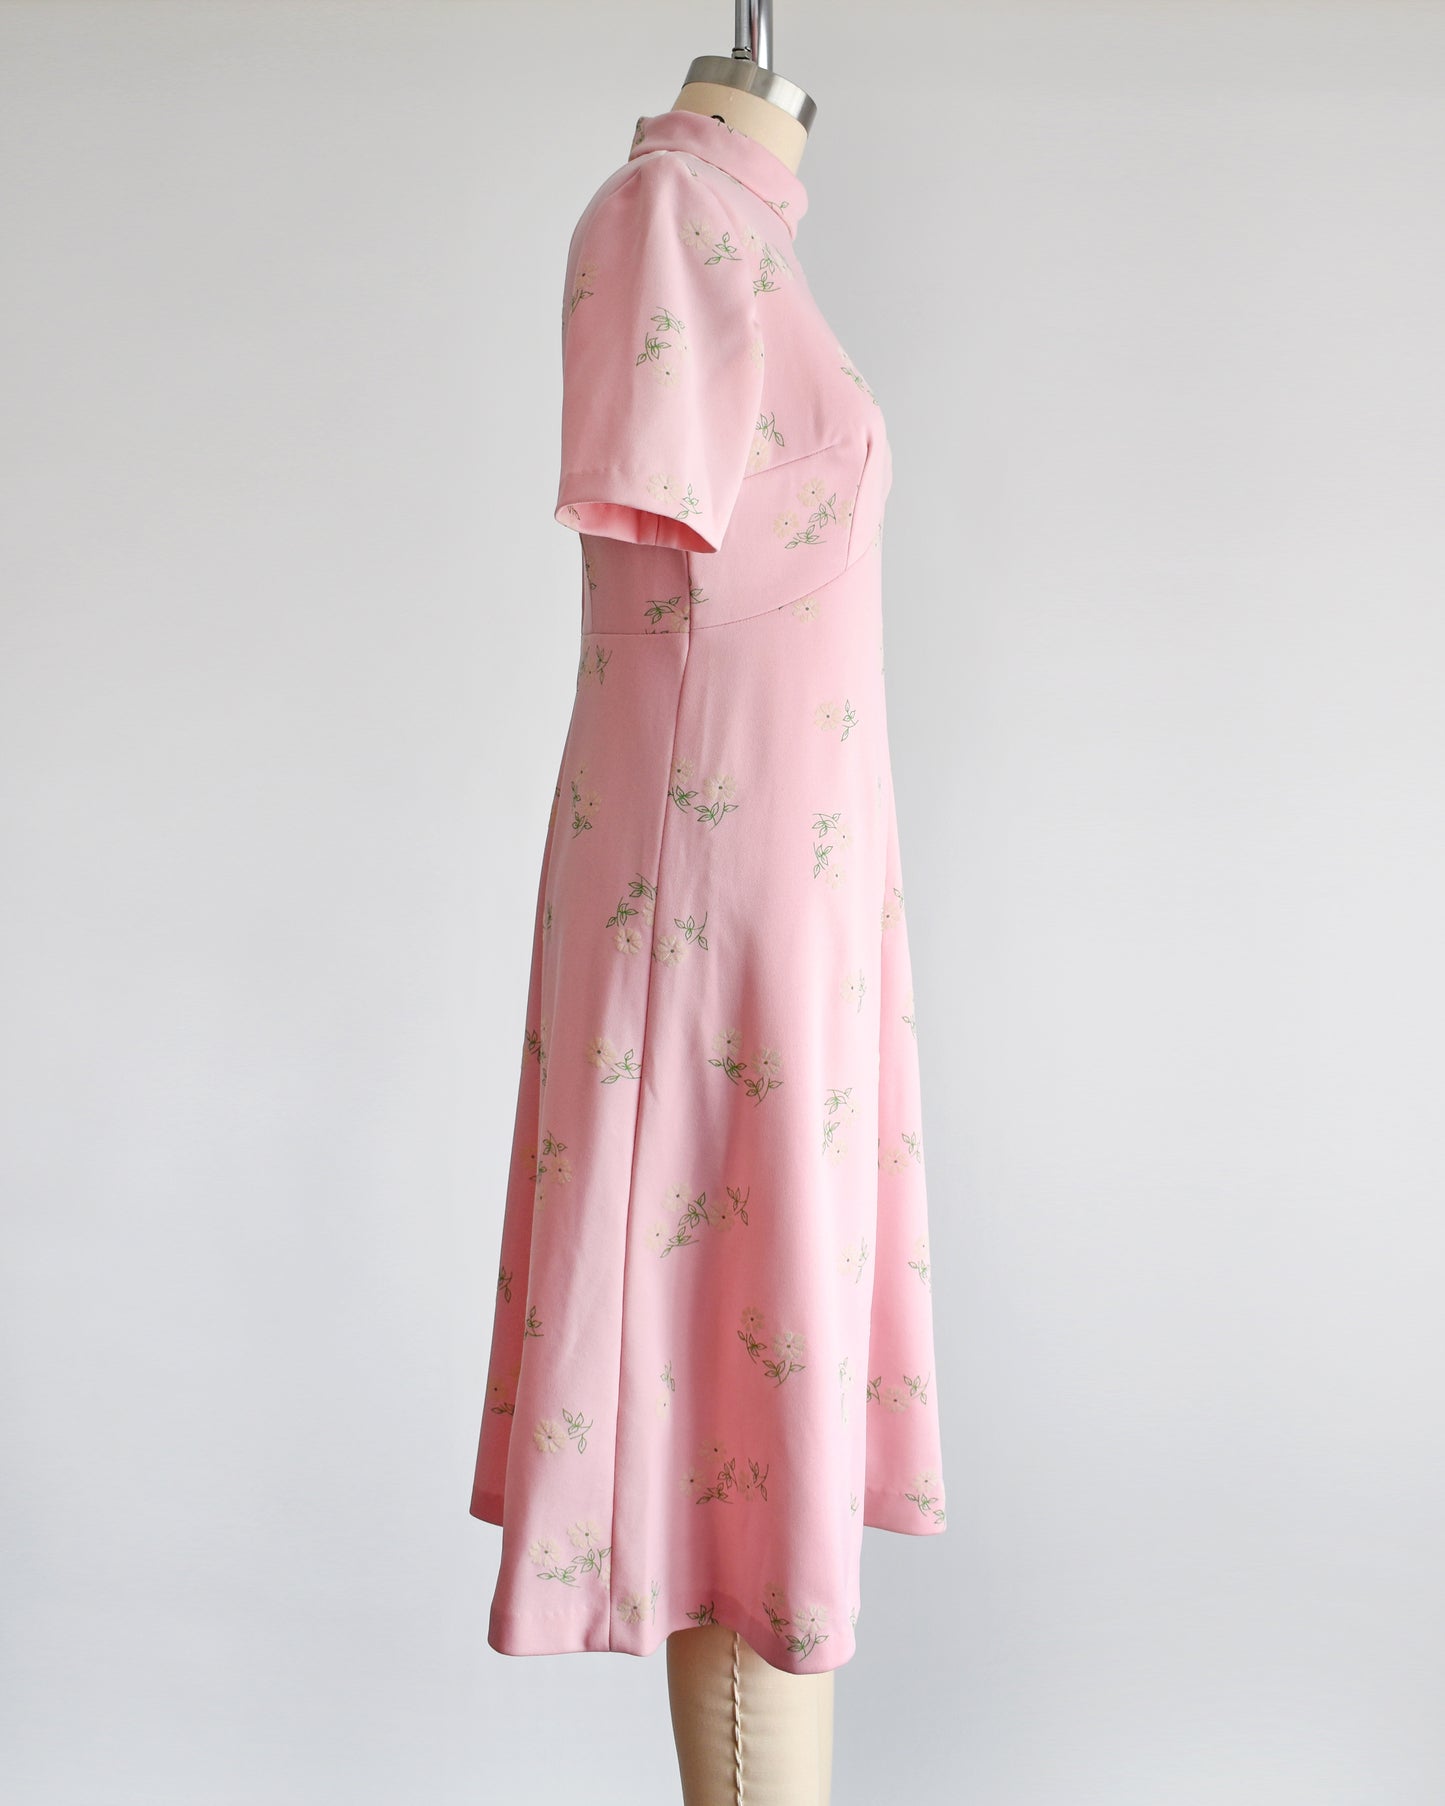 side view of a vintage 1960s pink and white floral mod dress.